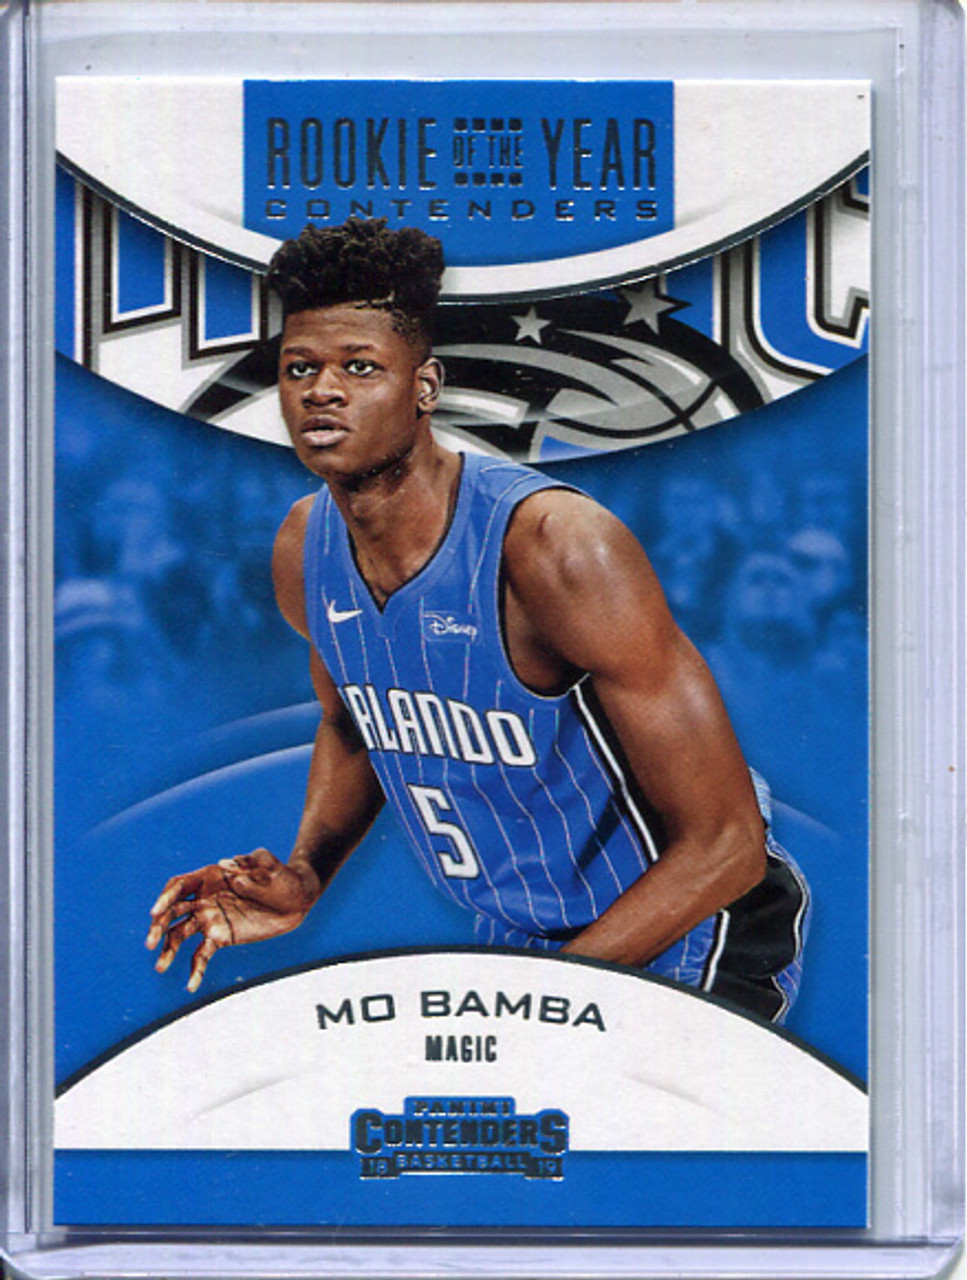 Mo Bamba 2018-19 Contenders, Rookie of the Year Contenders #16 Retail